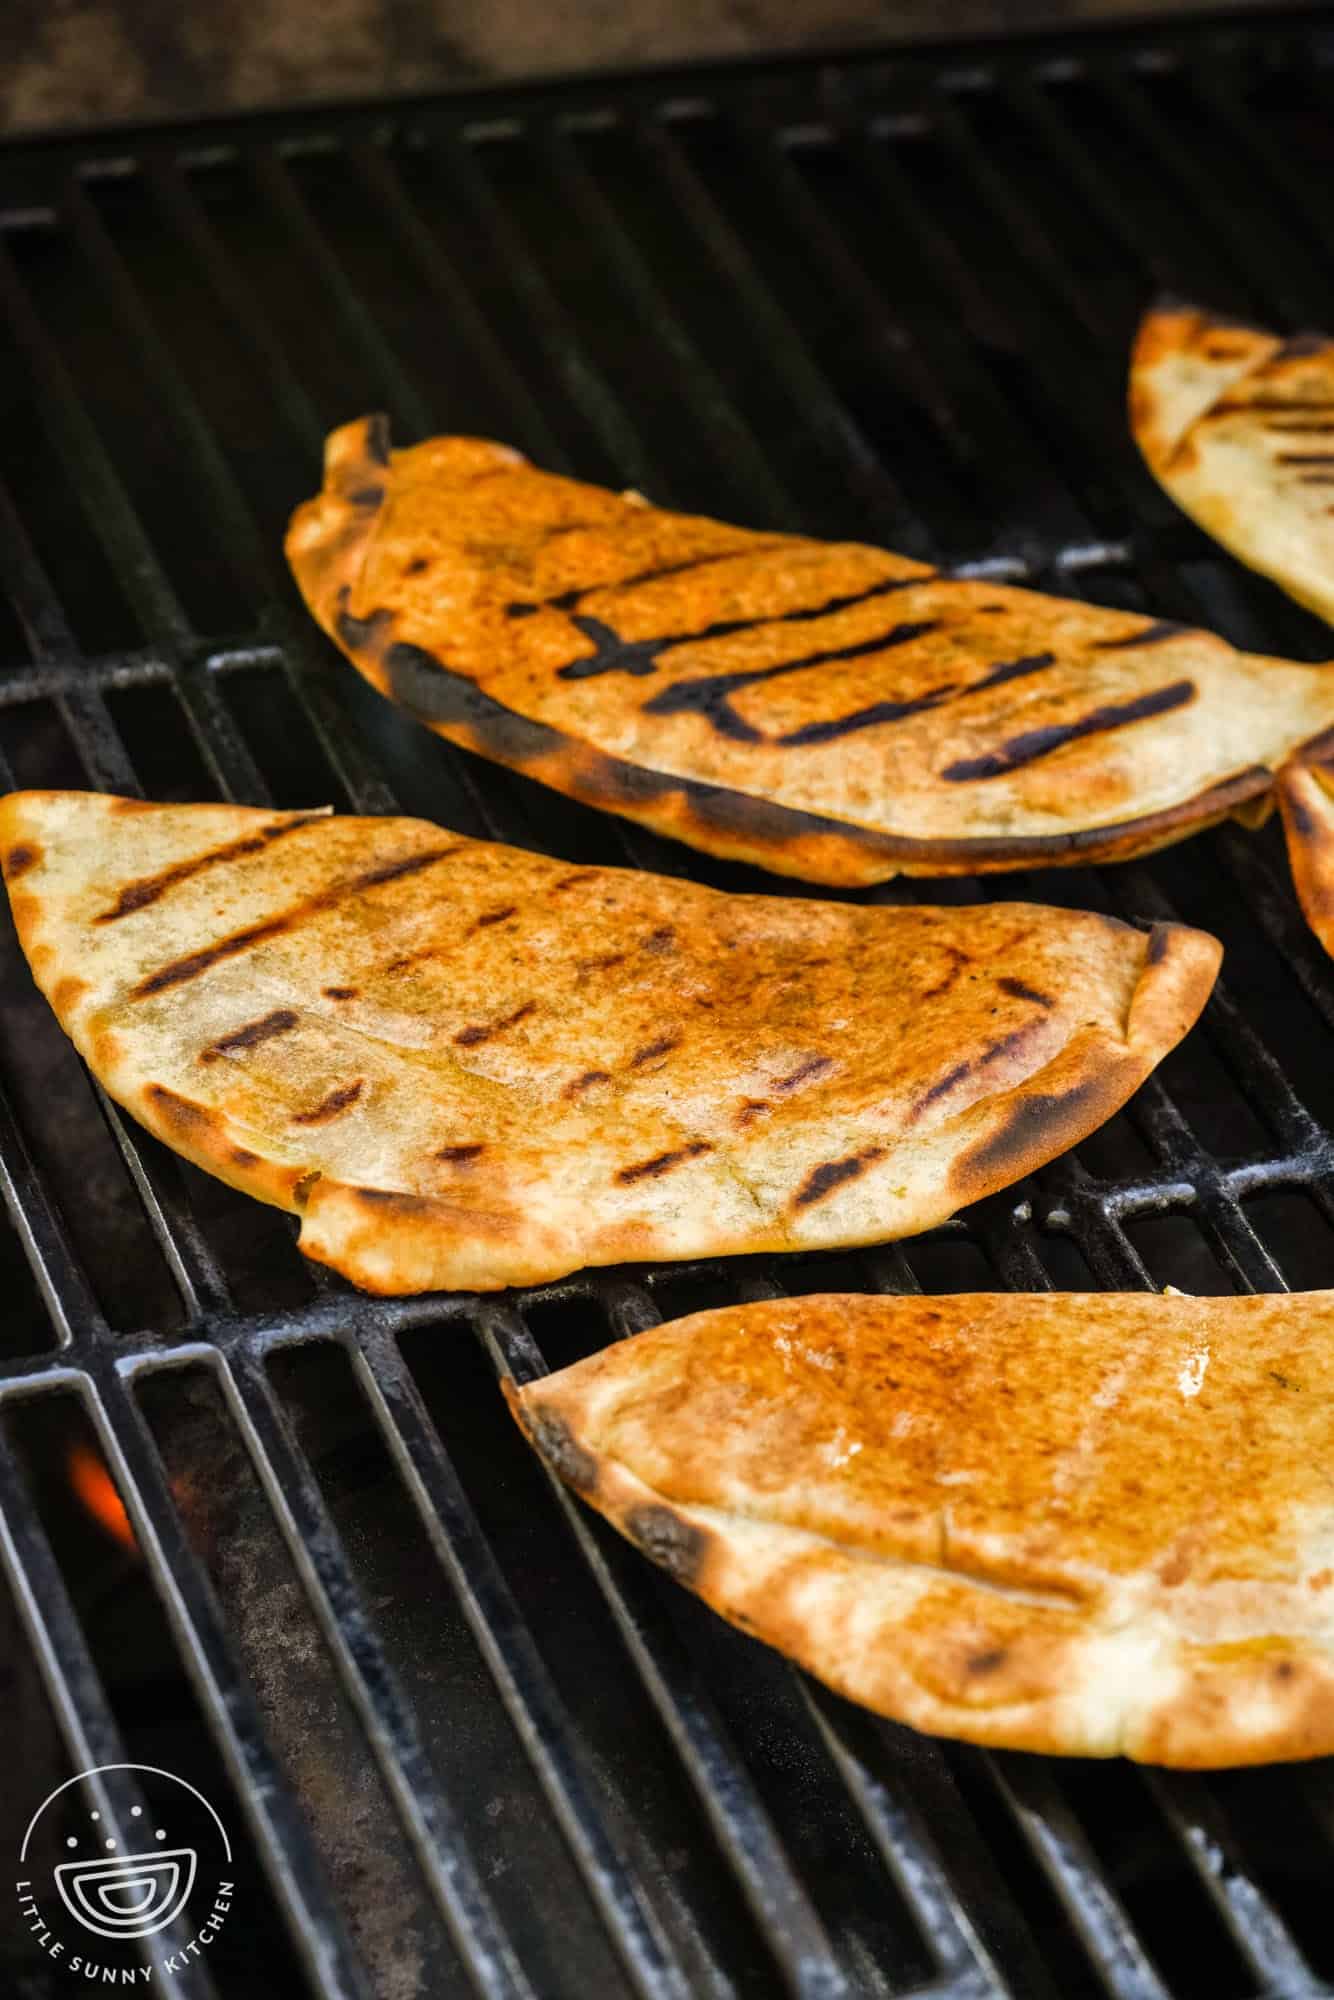 Meat stuffed pitas on the grill, with grill marks.